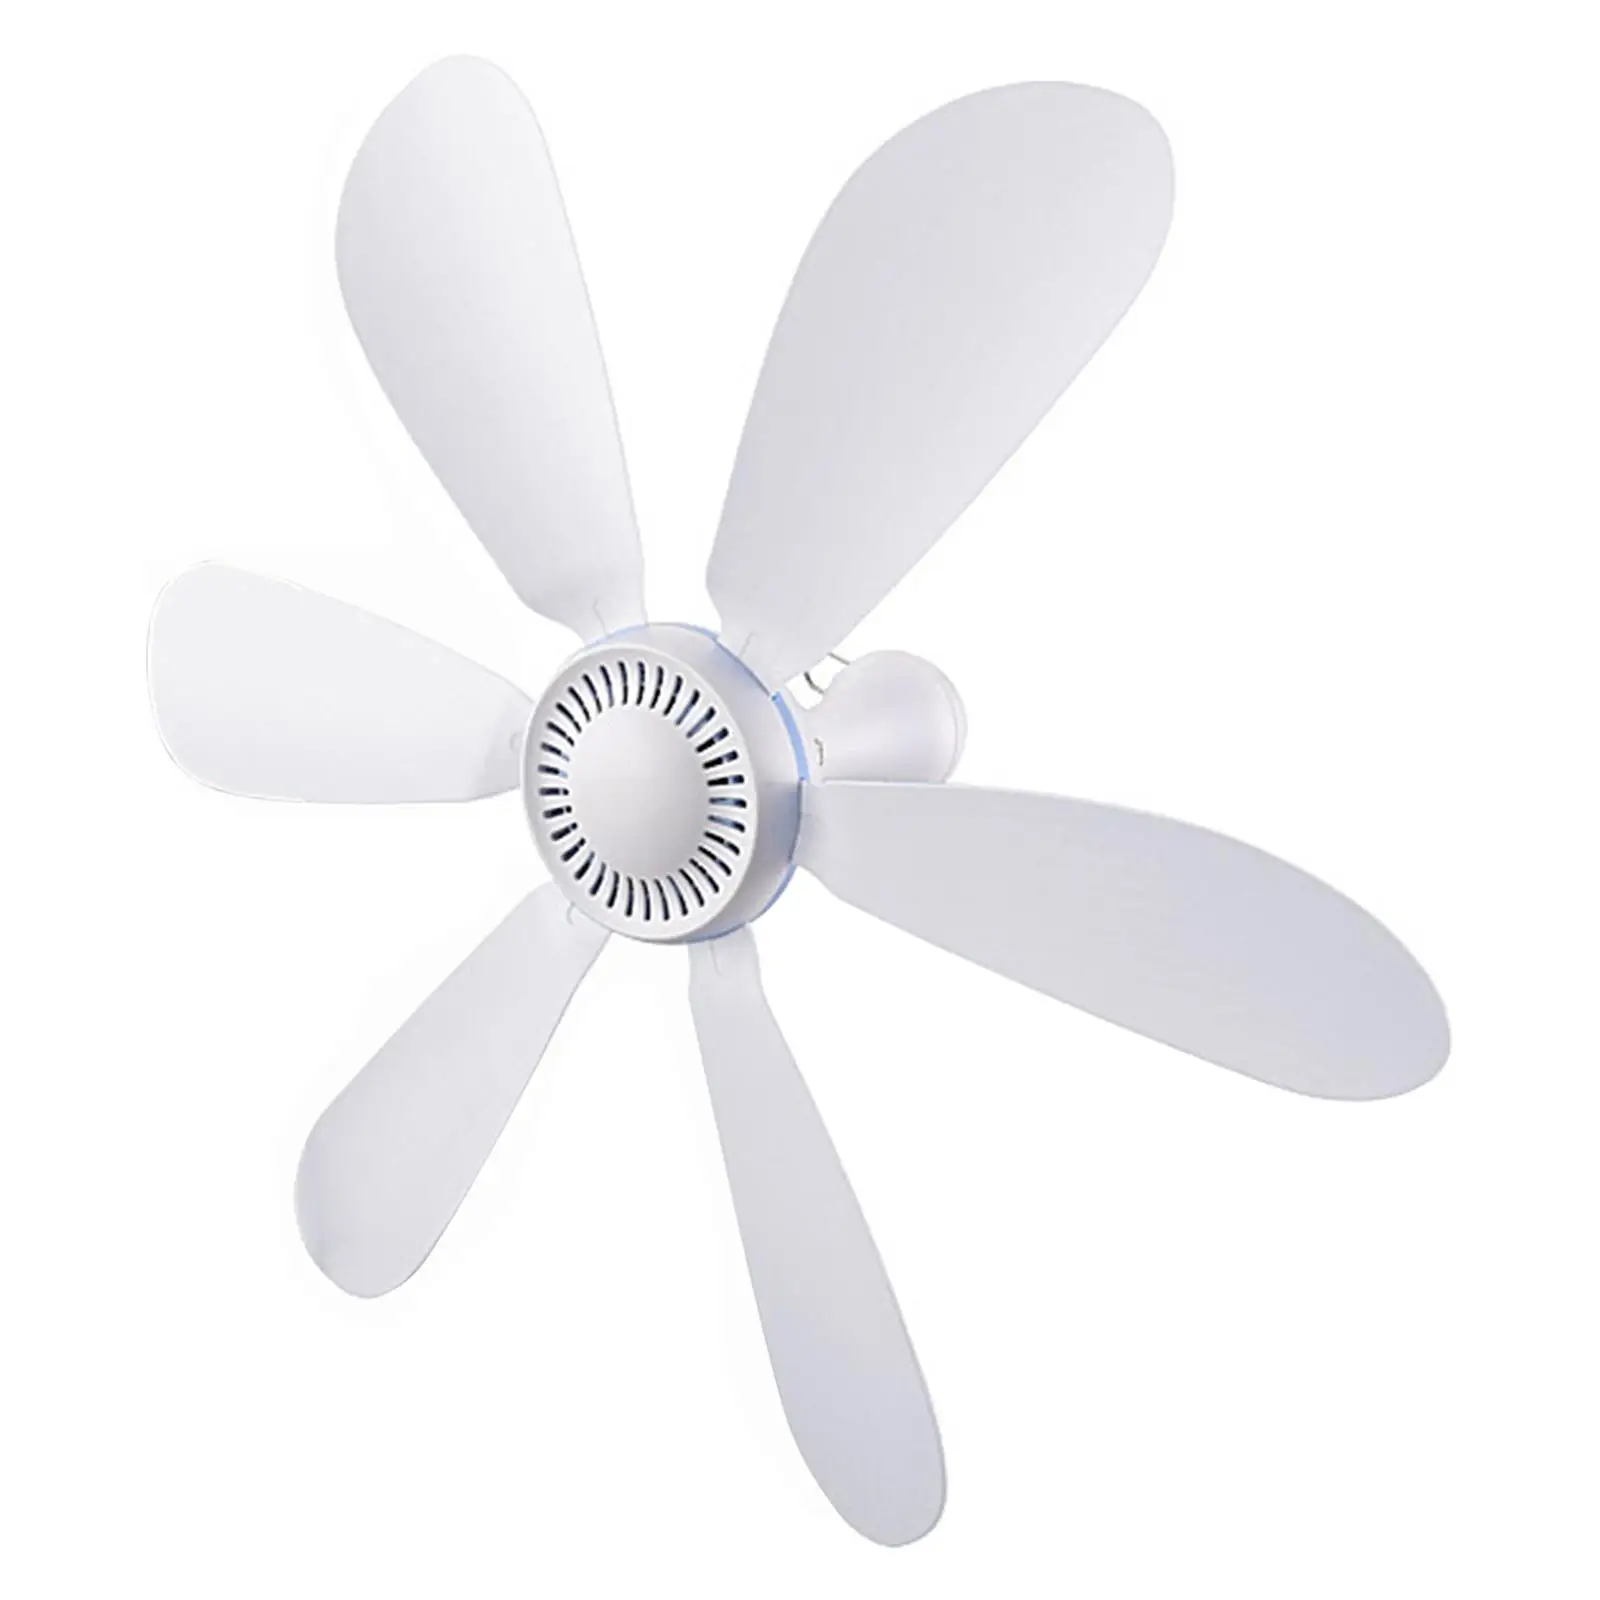 Personal Mini USB Ceiling Fan USB Hanging Fan Air Cooler Quiet Electrical Fan White 5V for Basement Camping Emergency Bed Office